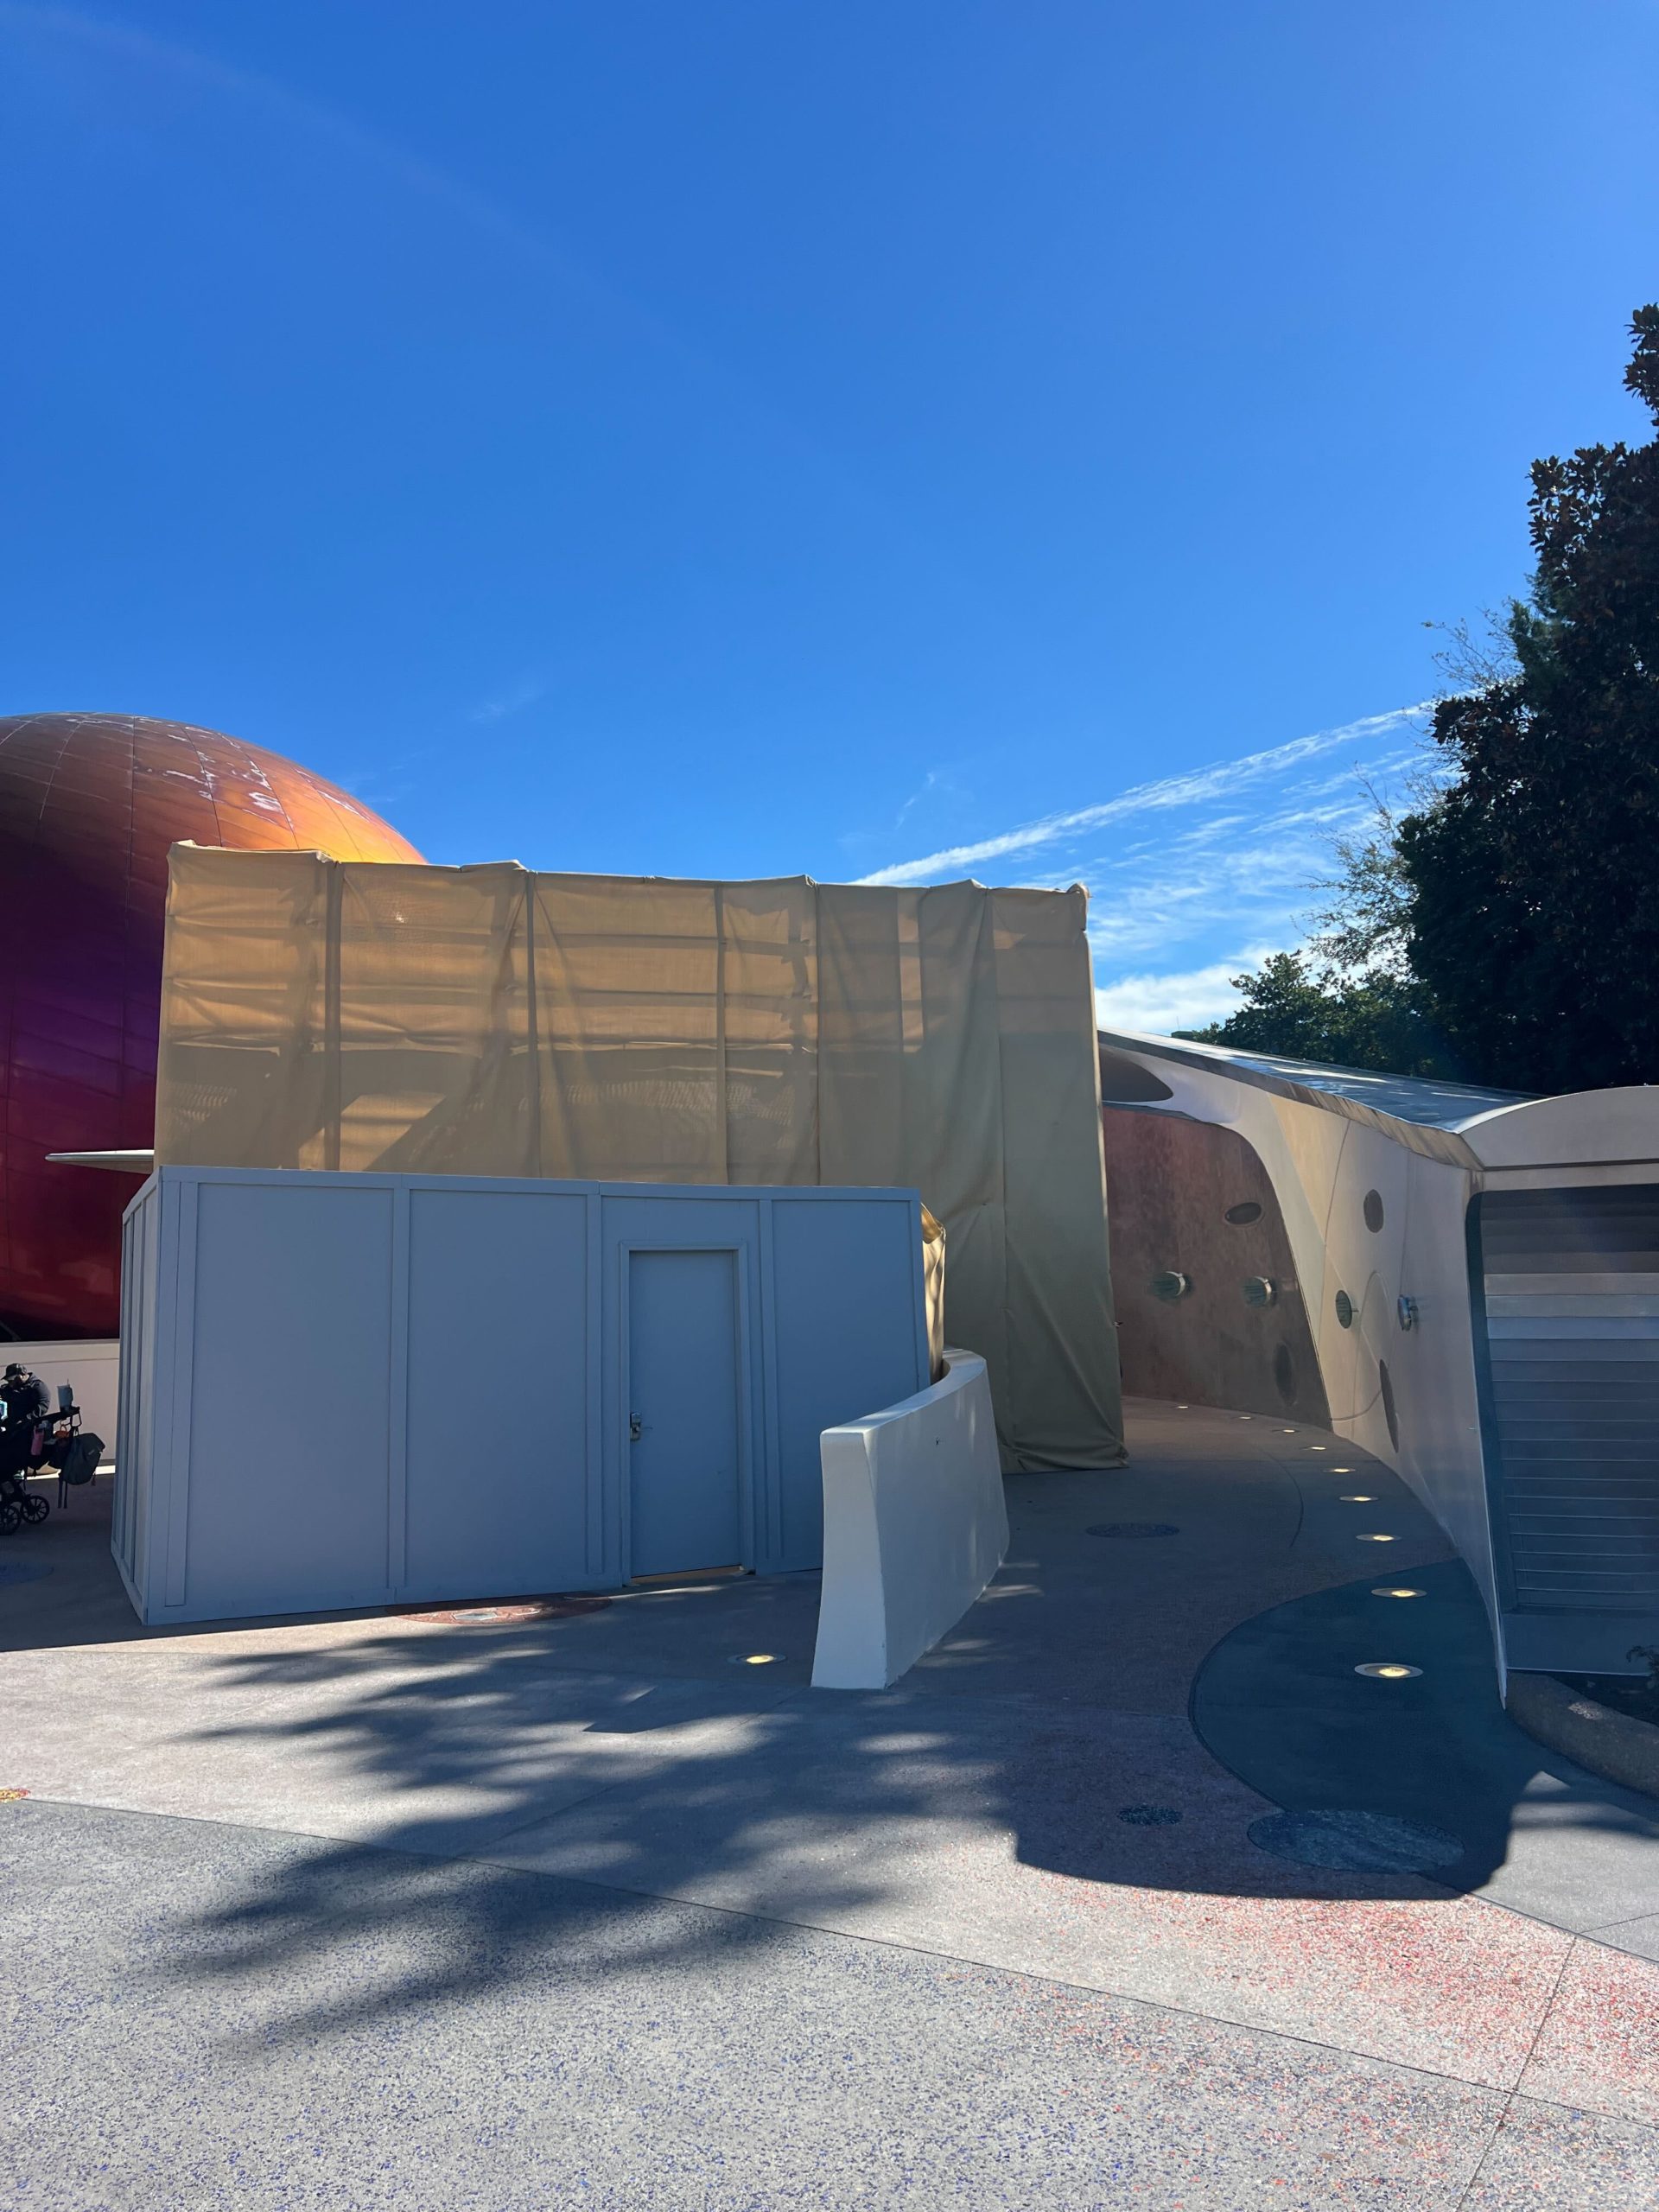 mission space sign removed